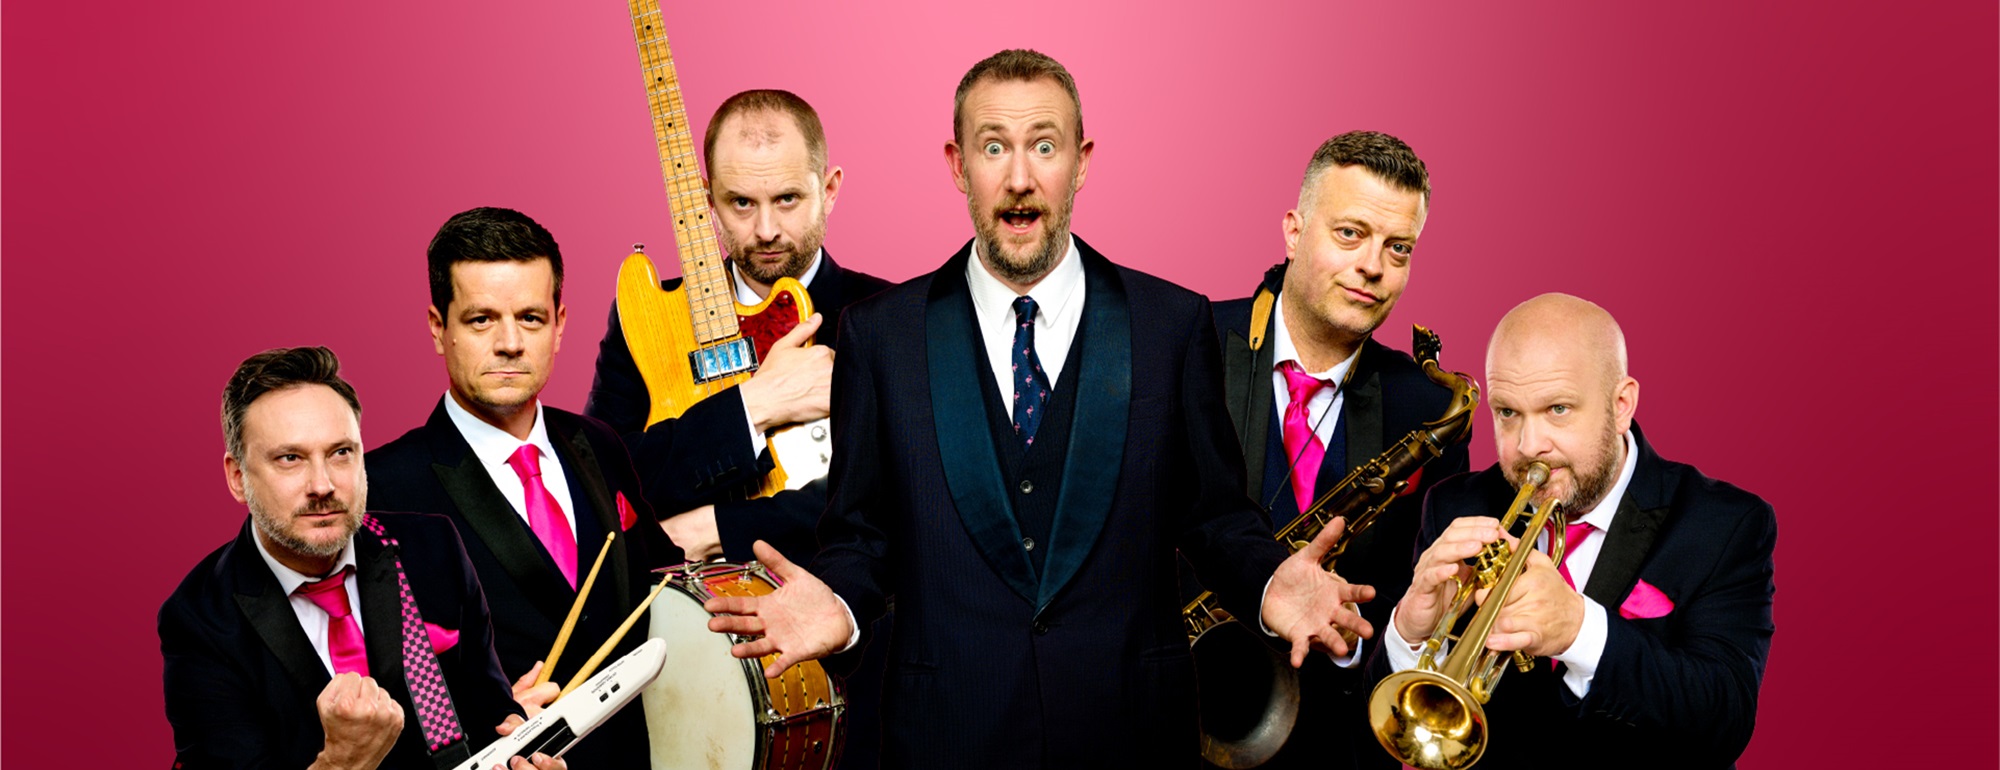 Members of the Horne Section holding their instruments standing against a red background